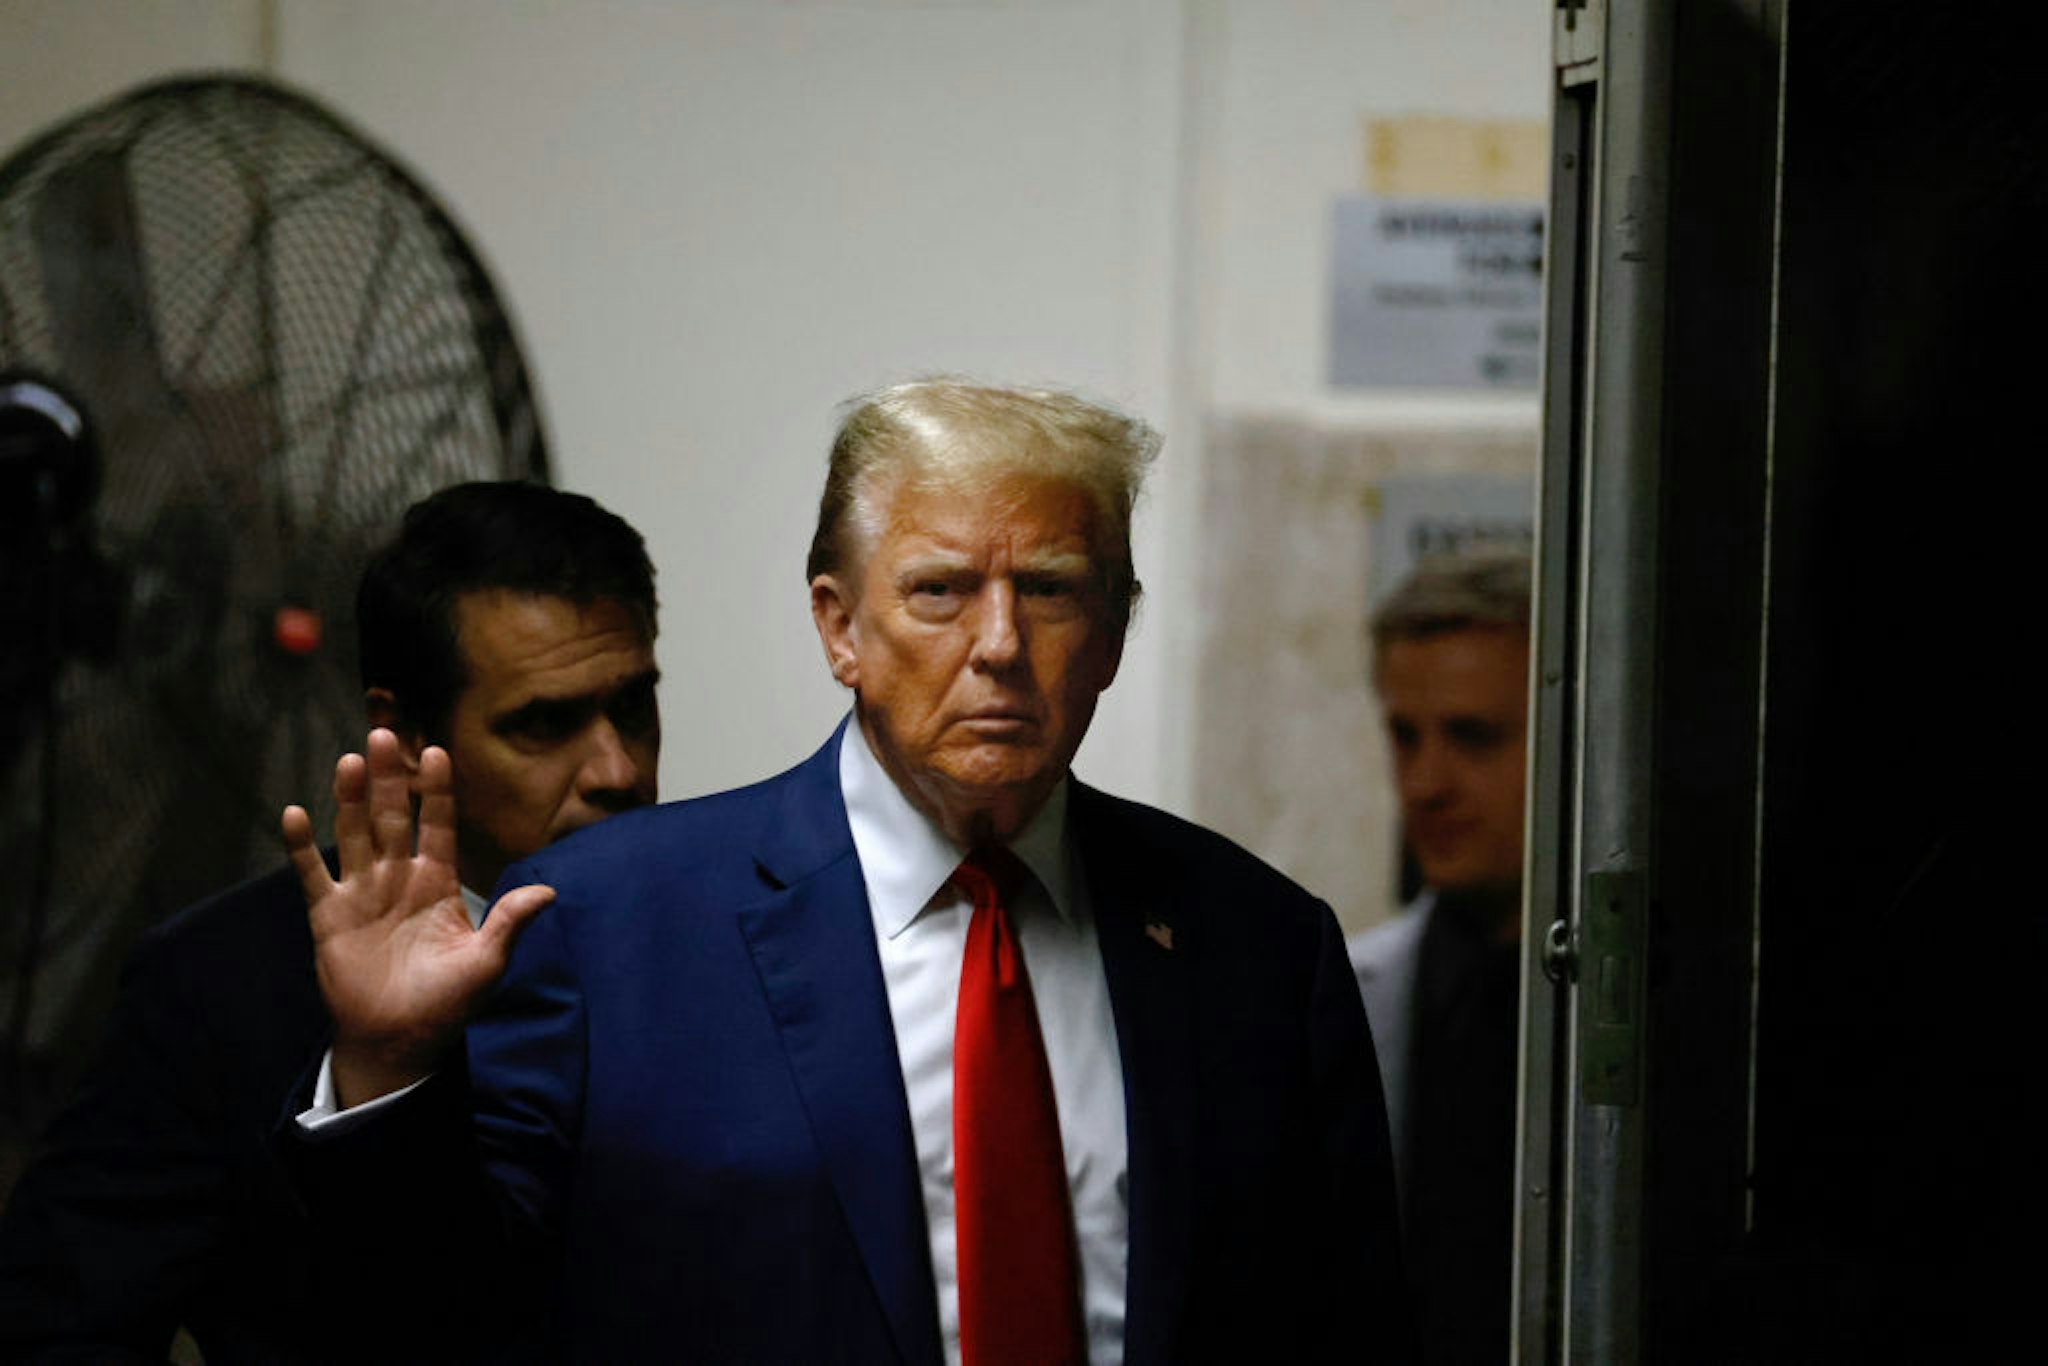 NEW YORK, NEW YORK - MAY 6: Former U.S. President Donald Trump gestures as he returns from a break in his trial for allegedly covering up hush money payments at Manhattan Criminal Court on May 6, 2024 in New York City. Trump was charged with 34 counts of falsifying business records last year, which prosecutors say was an effort to hide a potential sex scandal, both before and after the 2016 presidential election. Trump is the first former U.S. president to face trial on criminal charges.